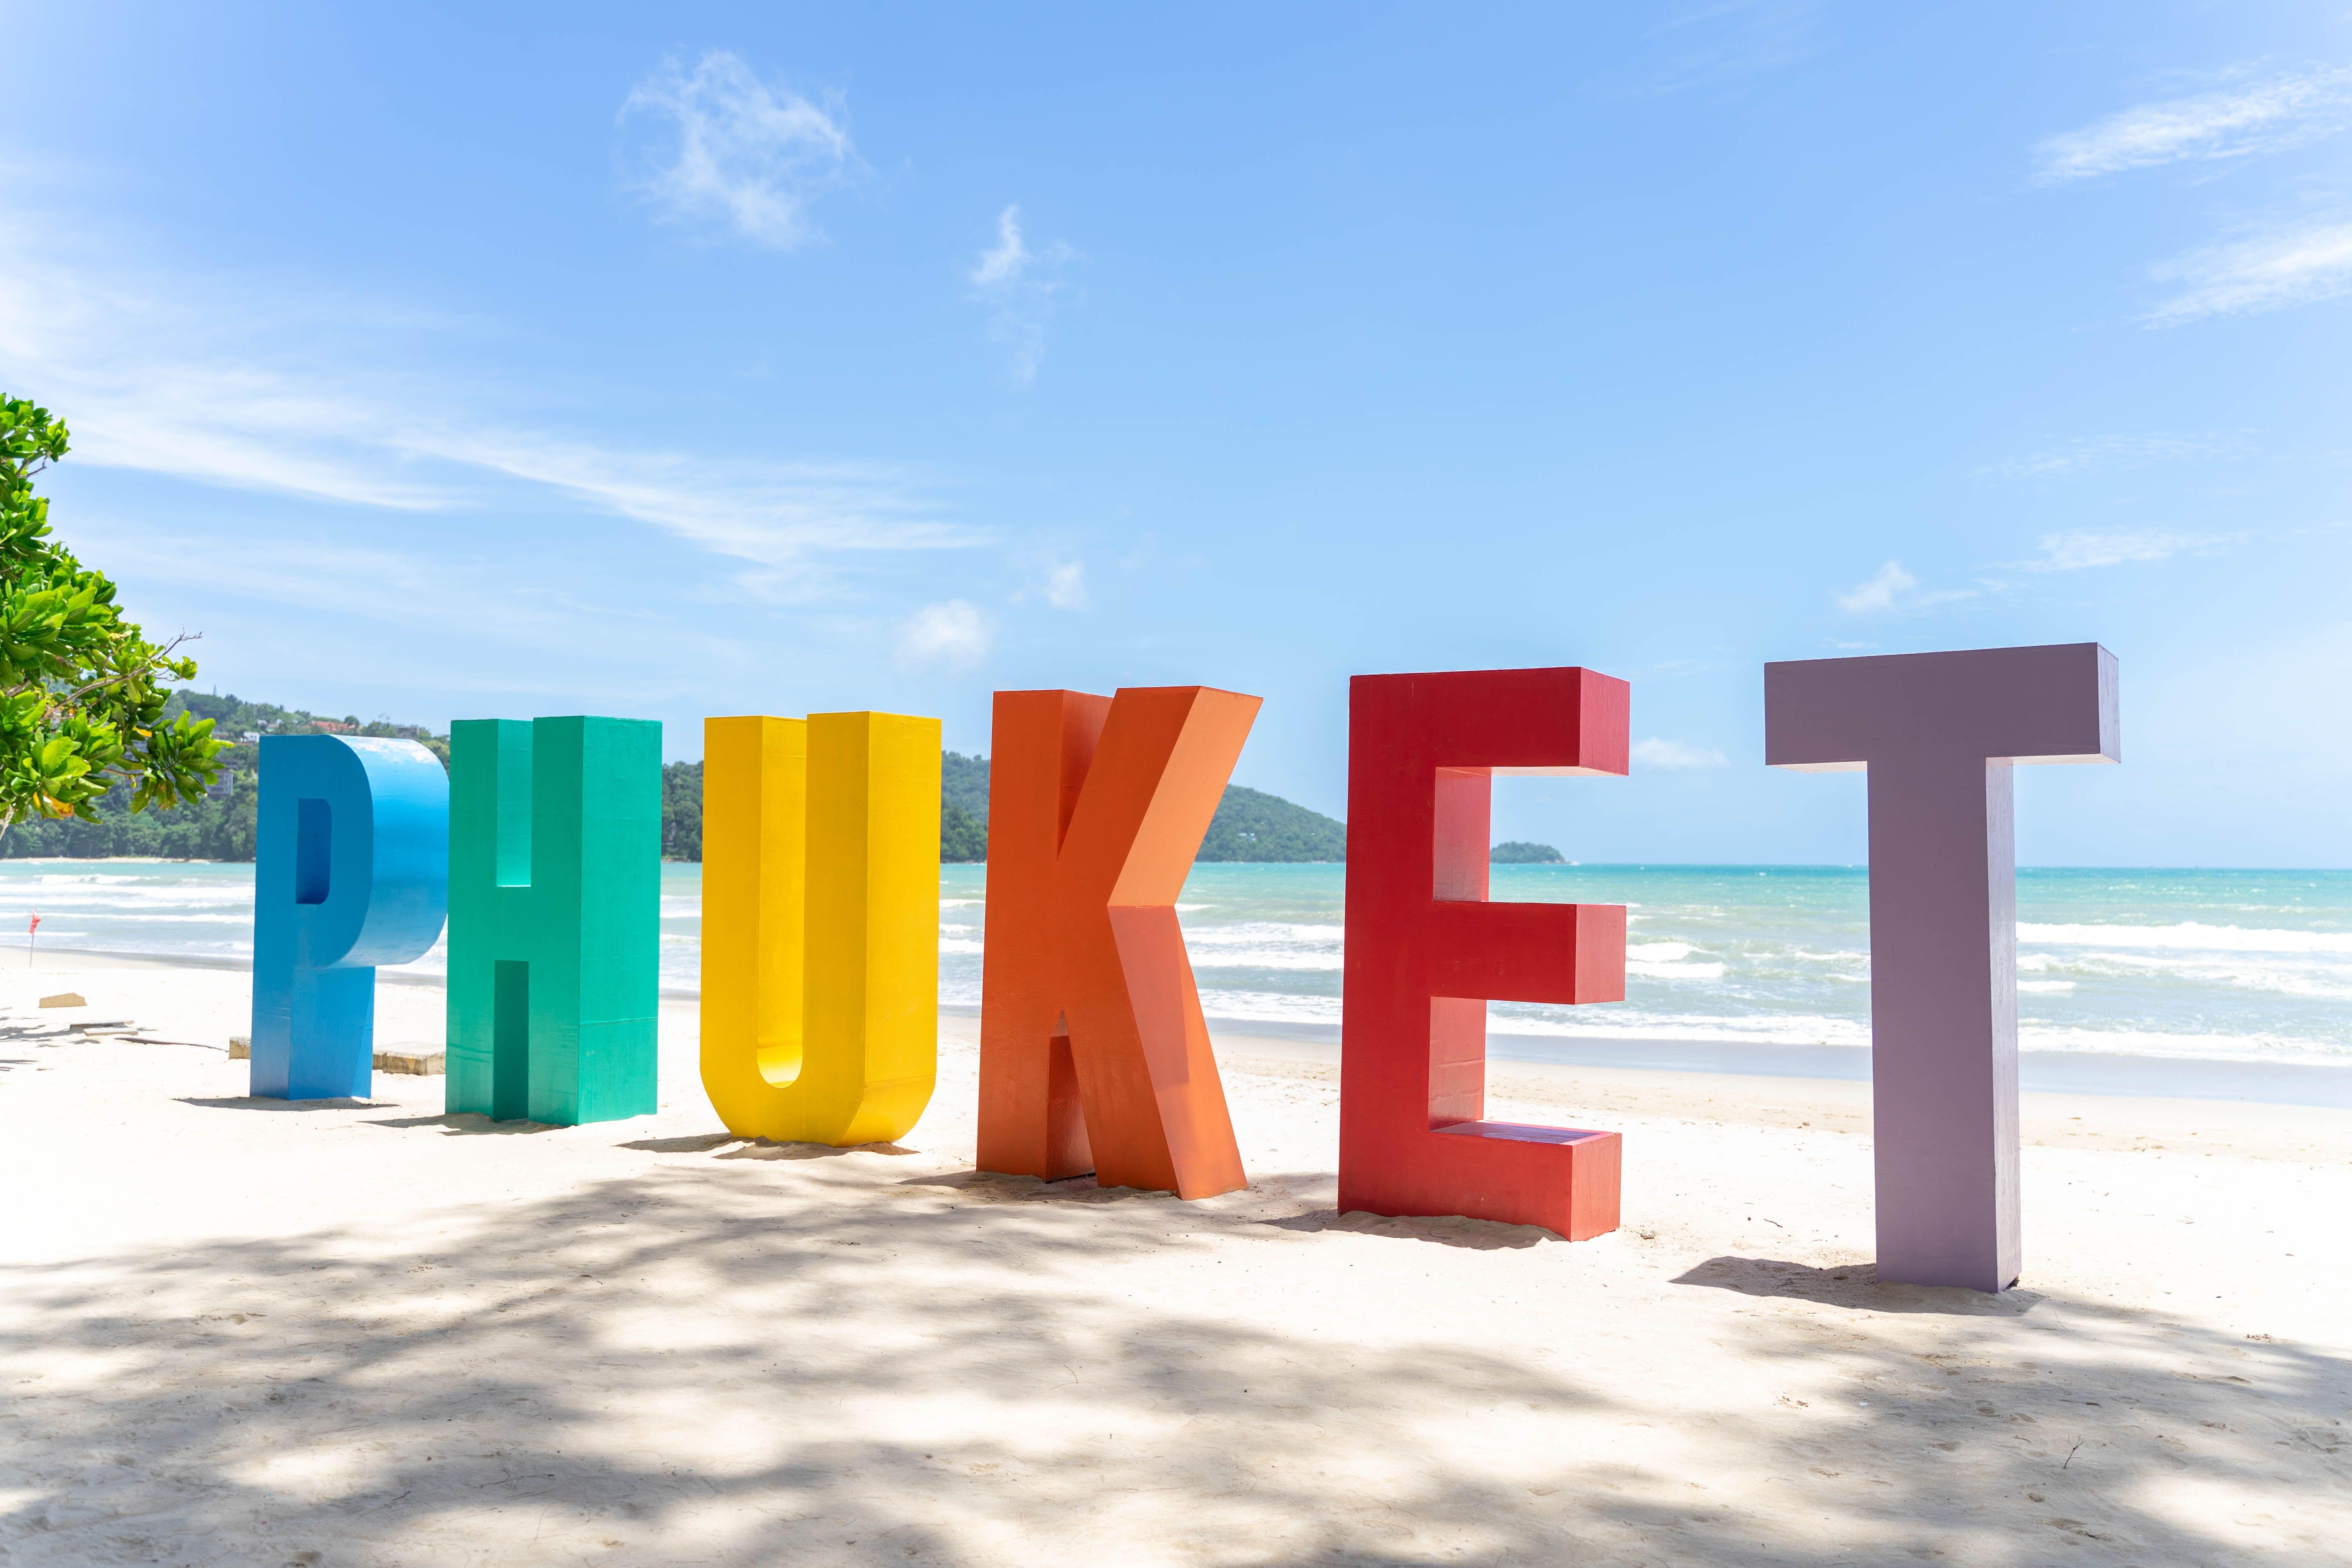 Things To Do In Phuket in 3 Days